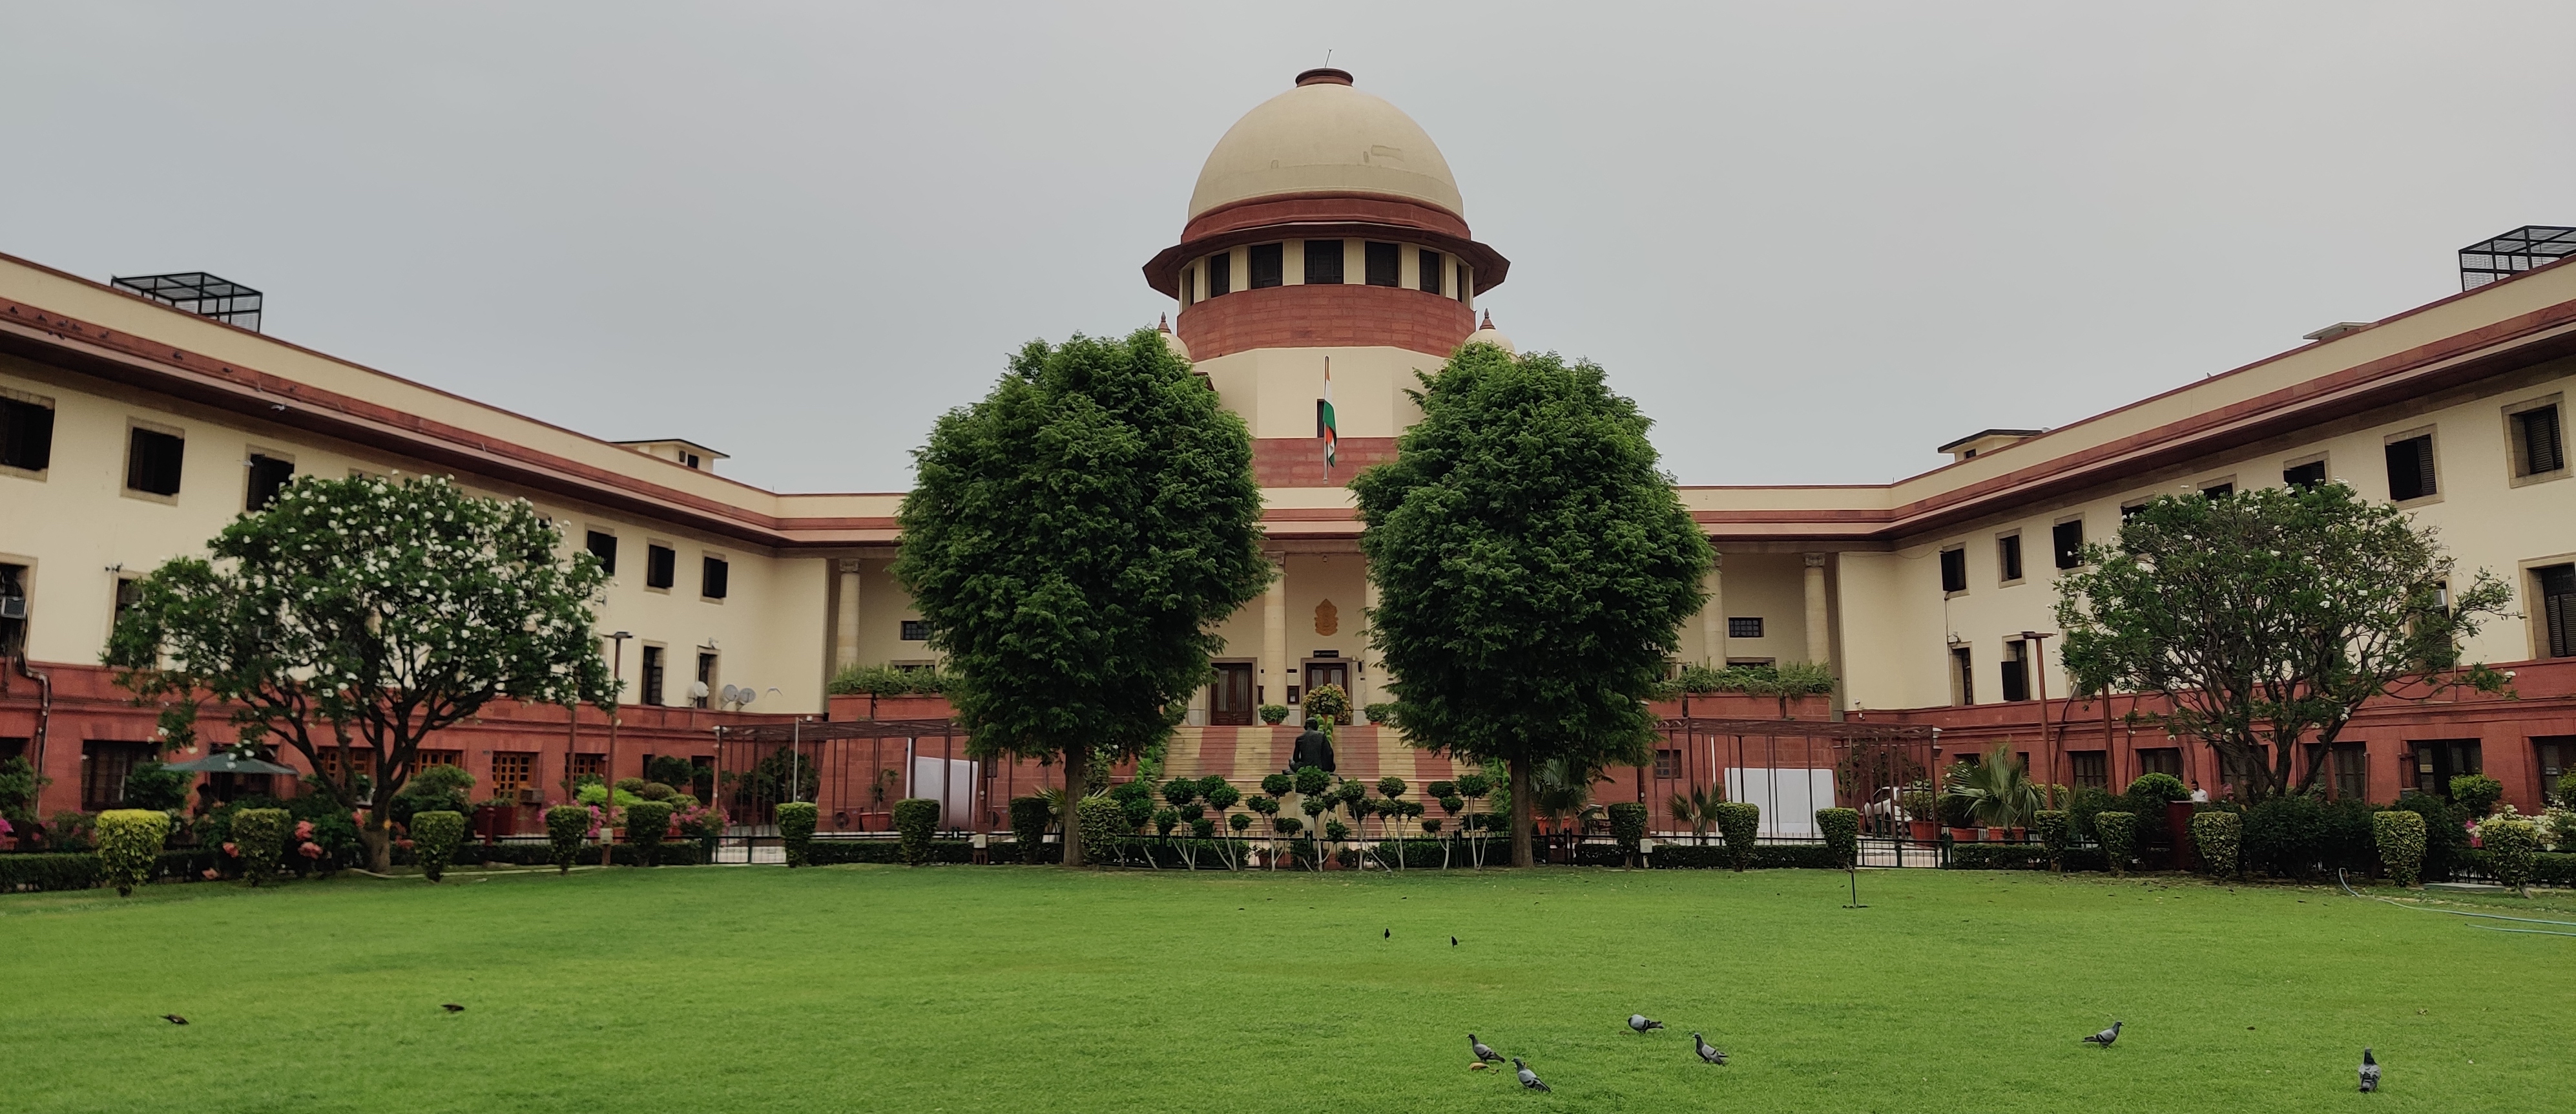 India dispatch: top court ruling to extend abortion rights relies on both domestic and international law